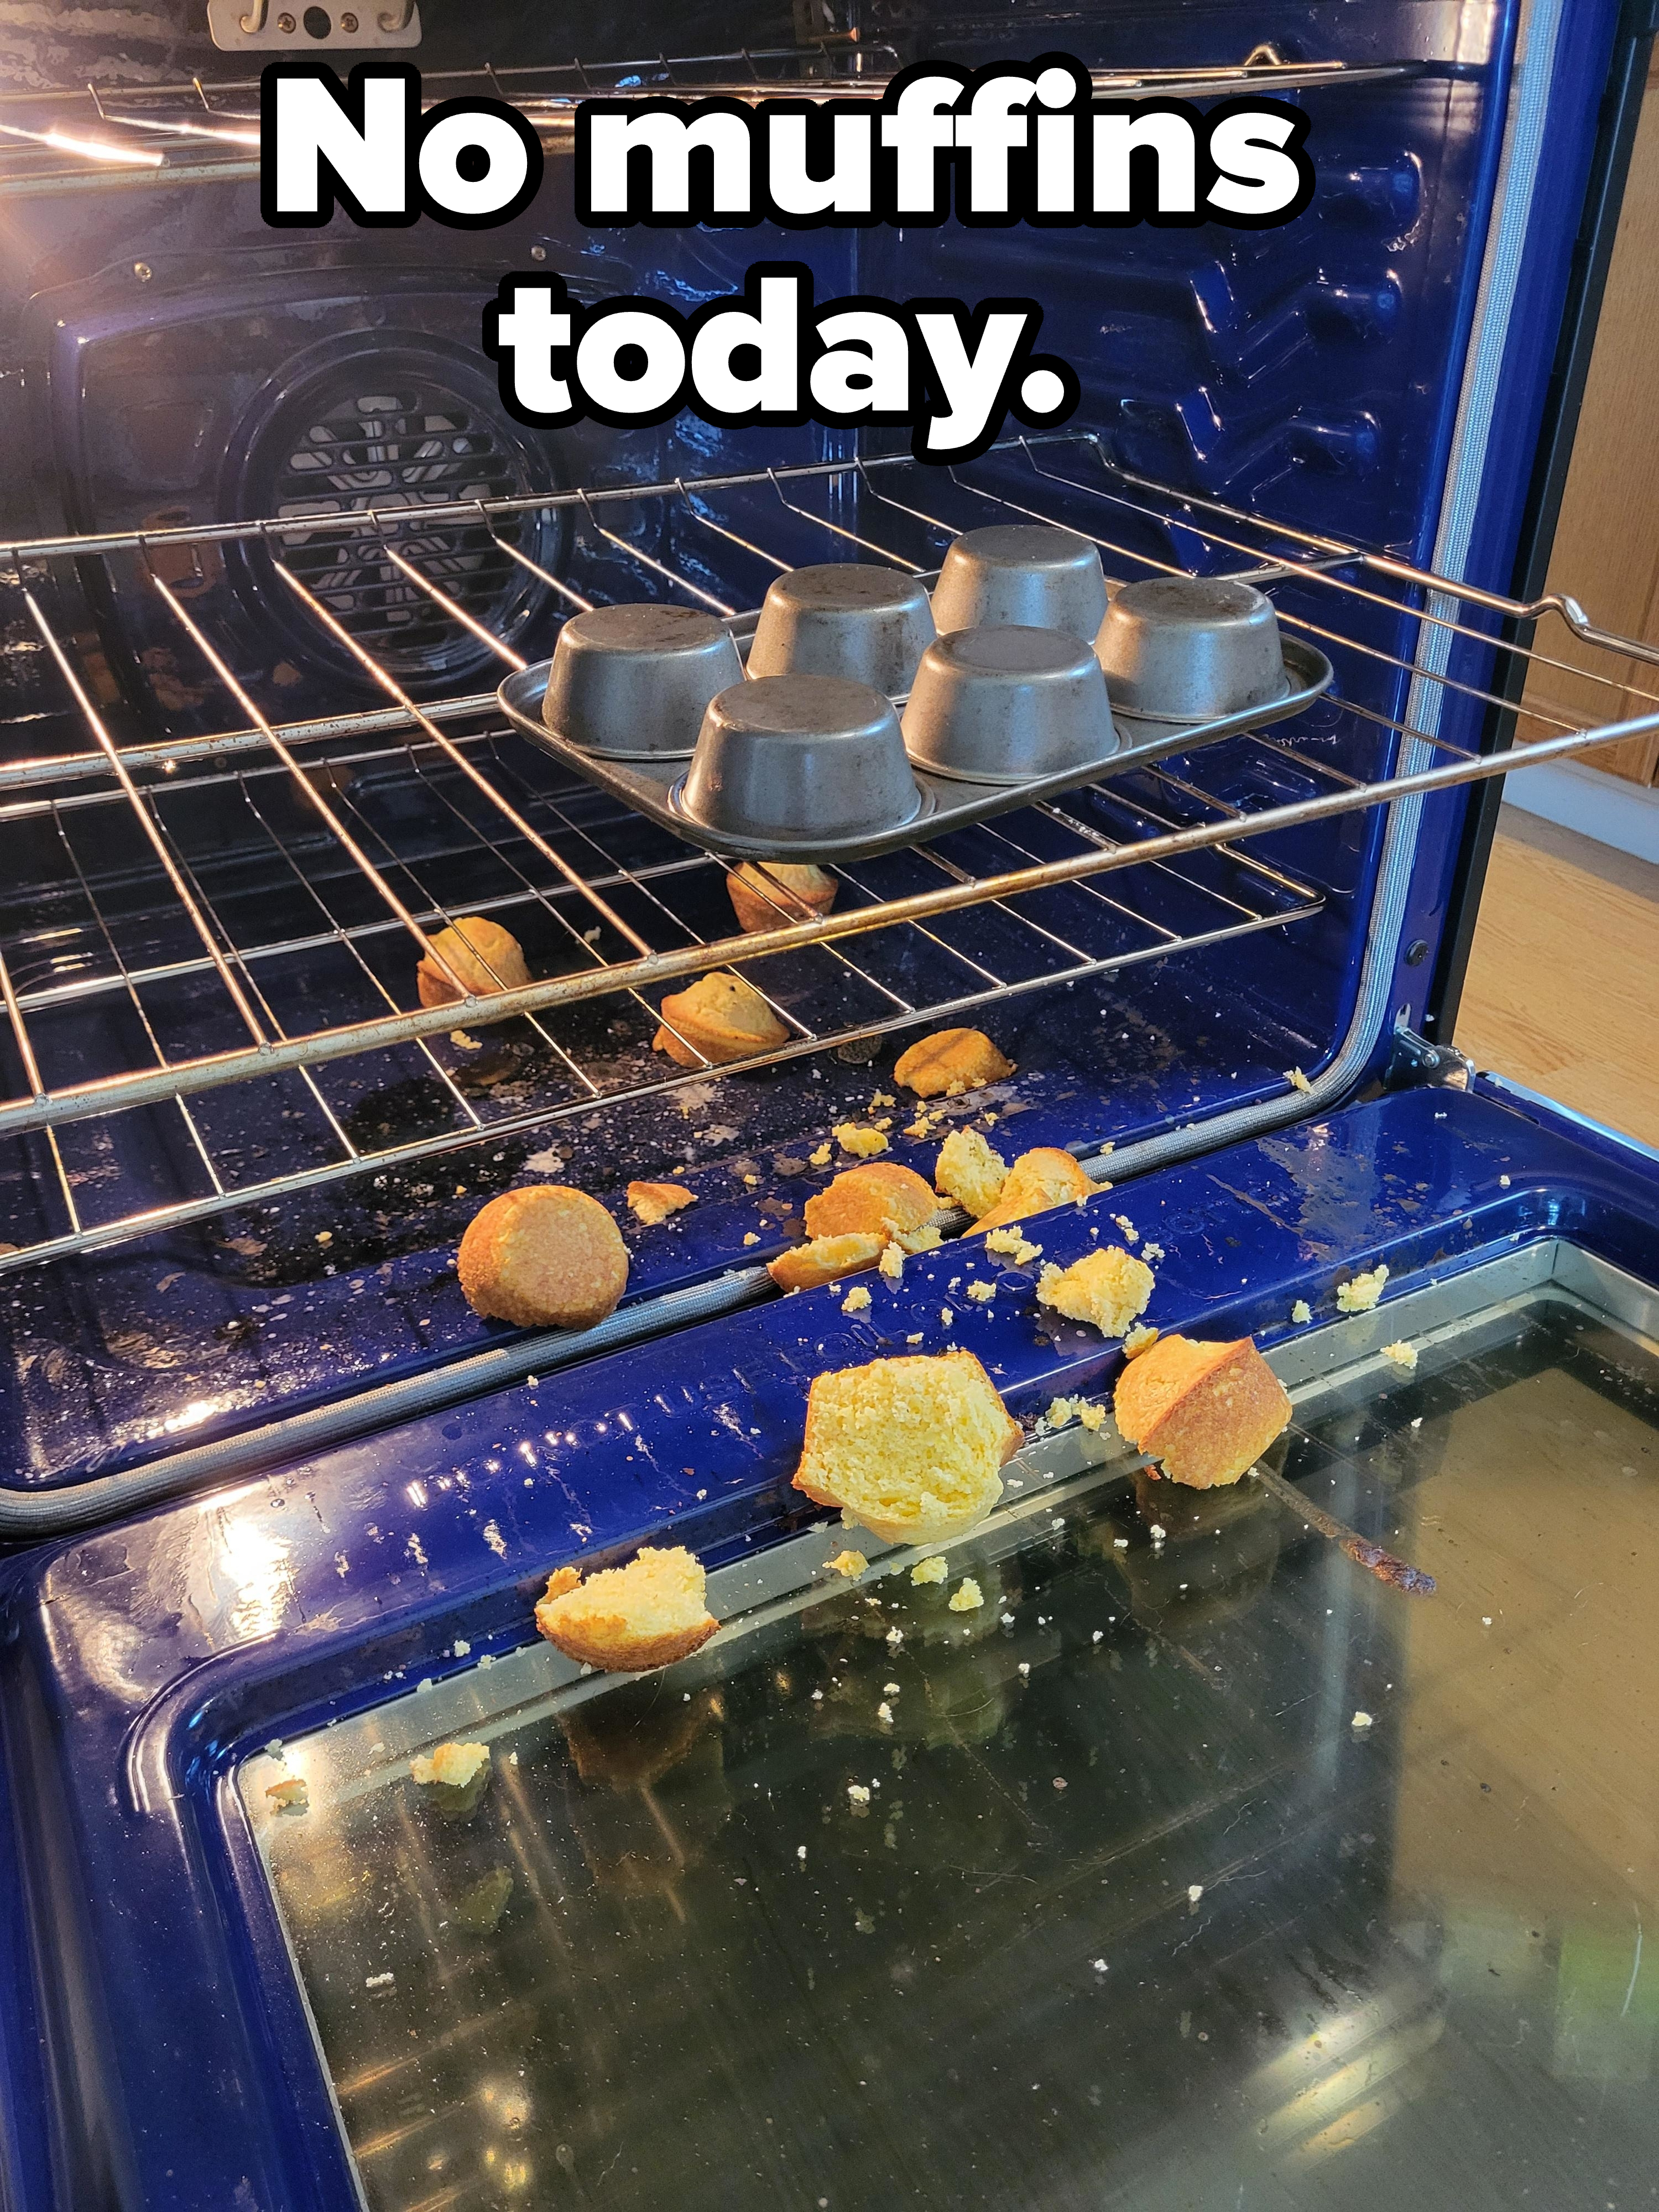 Exploded cupcakes on an oven floor with a metal tray and intact cupcakes above